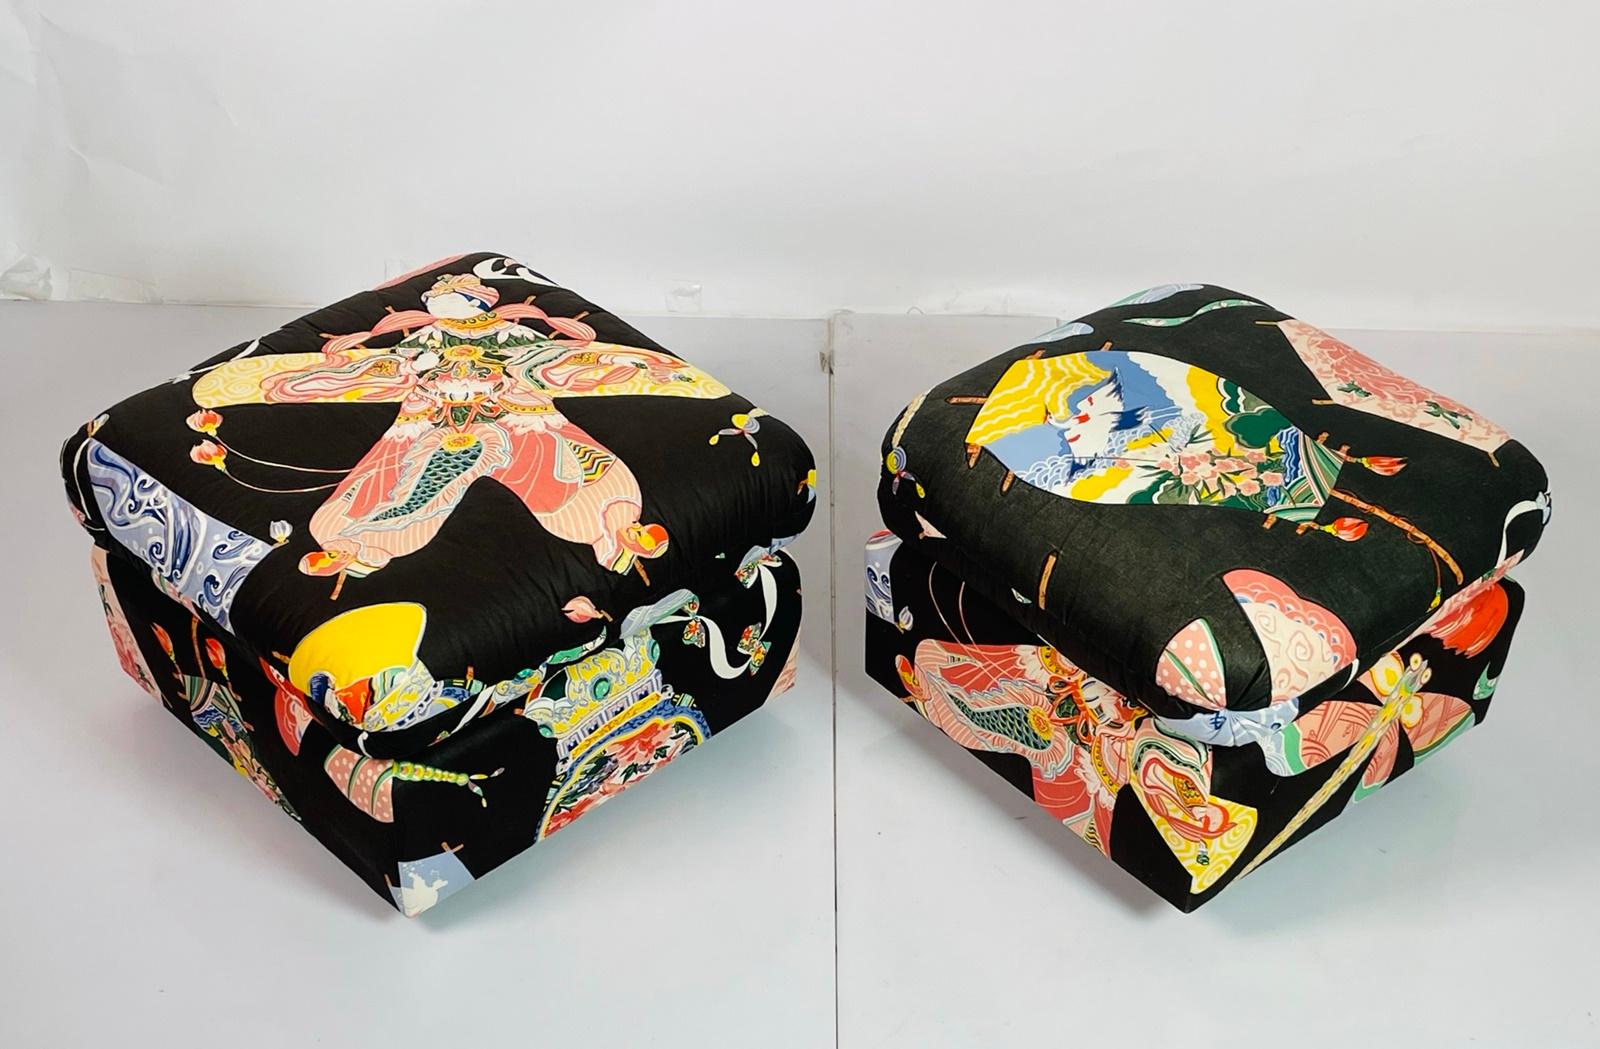 American Pair of Vintage Ottomans/Poufs Upholstered in Asian Print Fabric For Sale